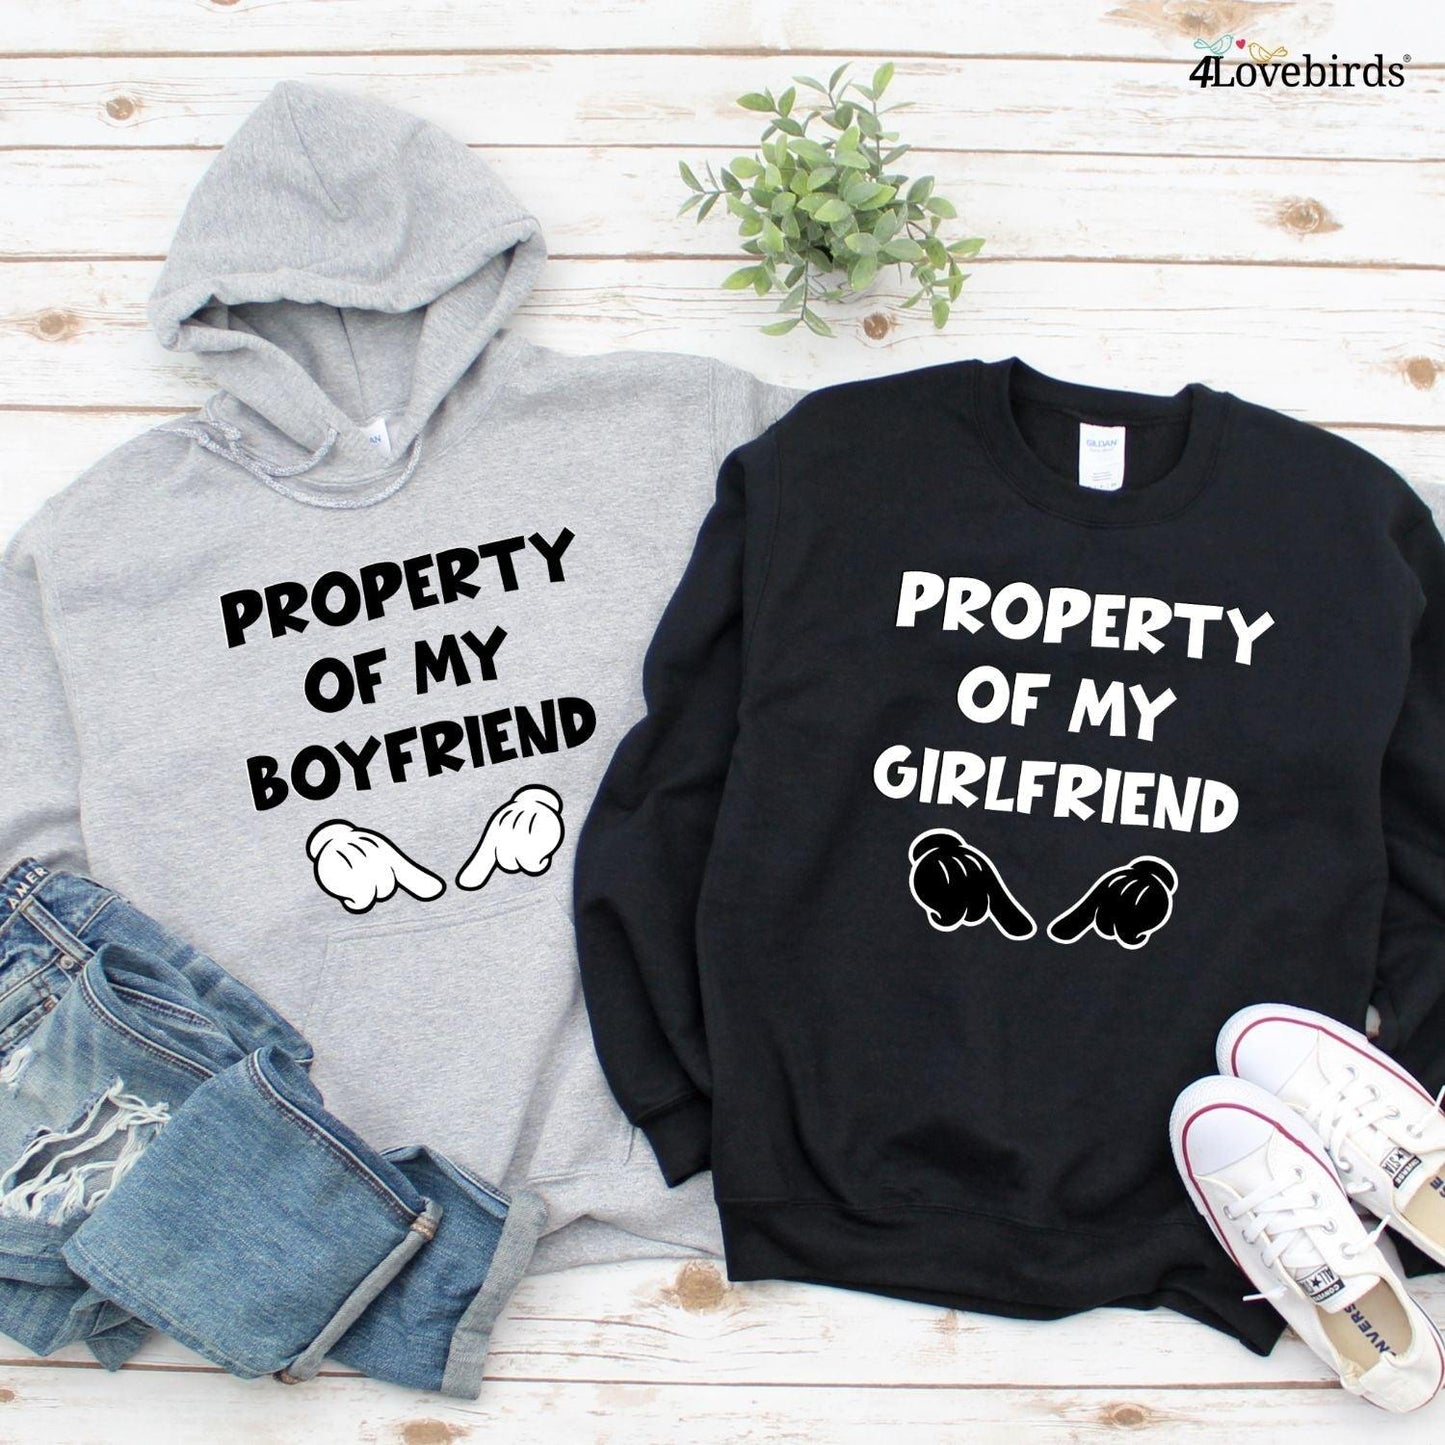 Funny Couple Matching Sets: Property Of My Boyfriend/Girlfriend Outfits - 4Lovebirds